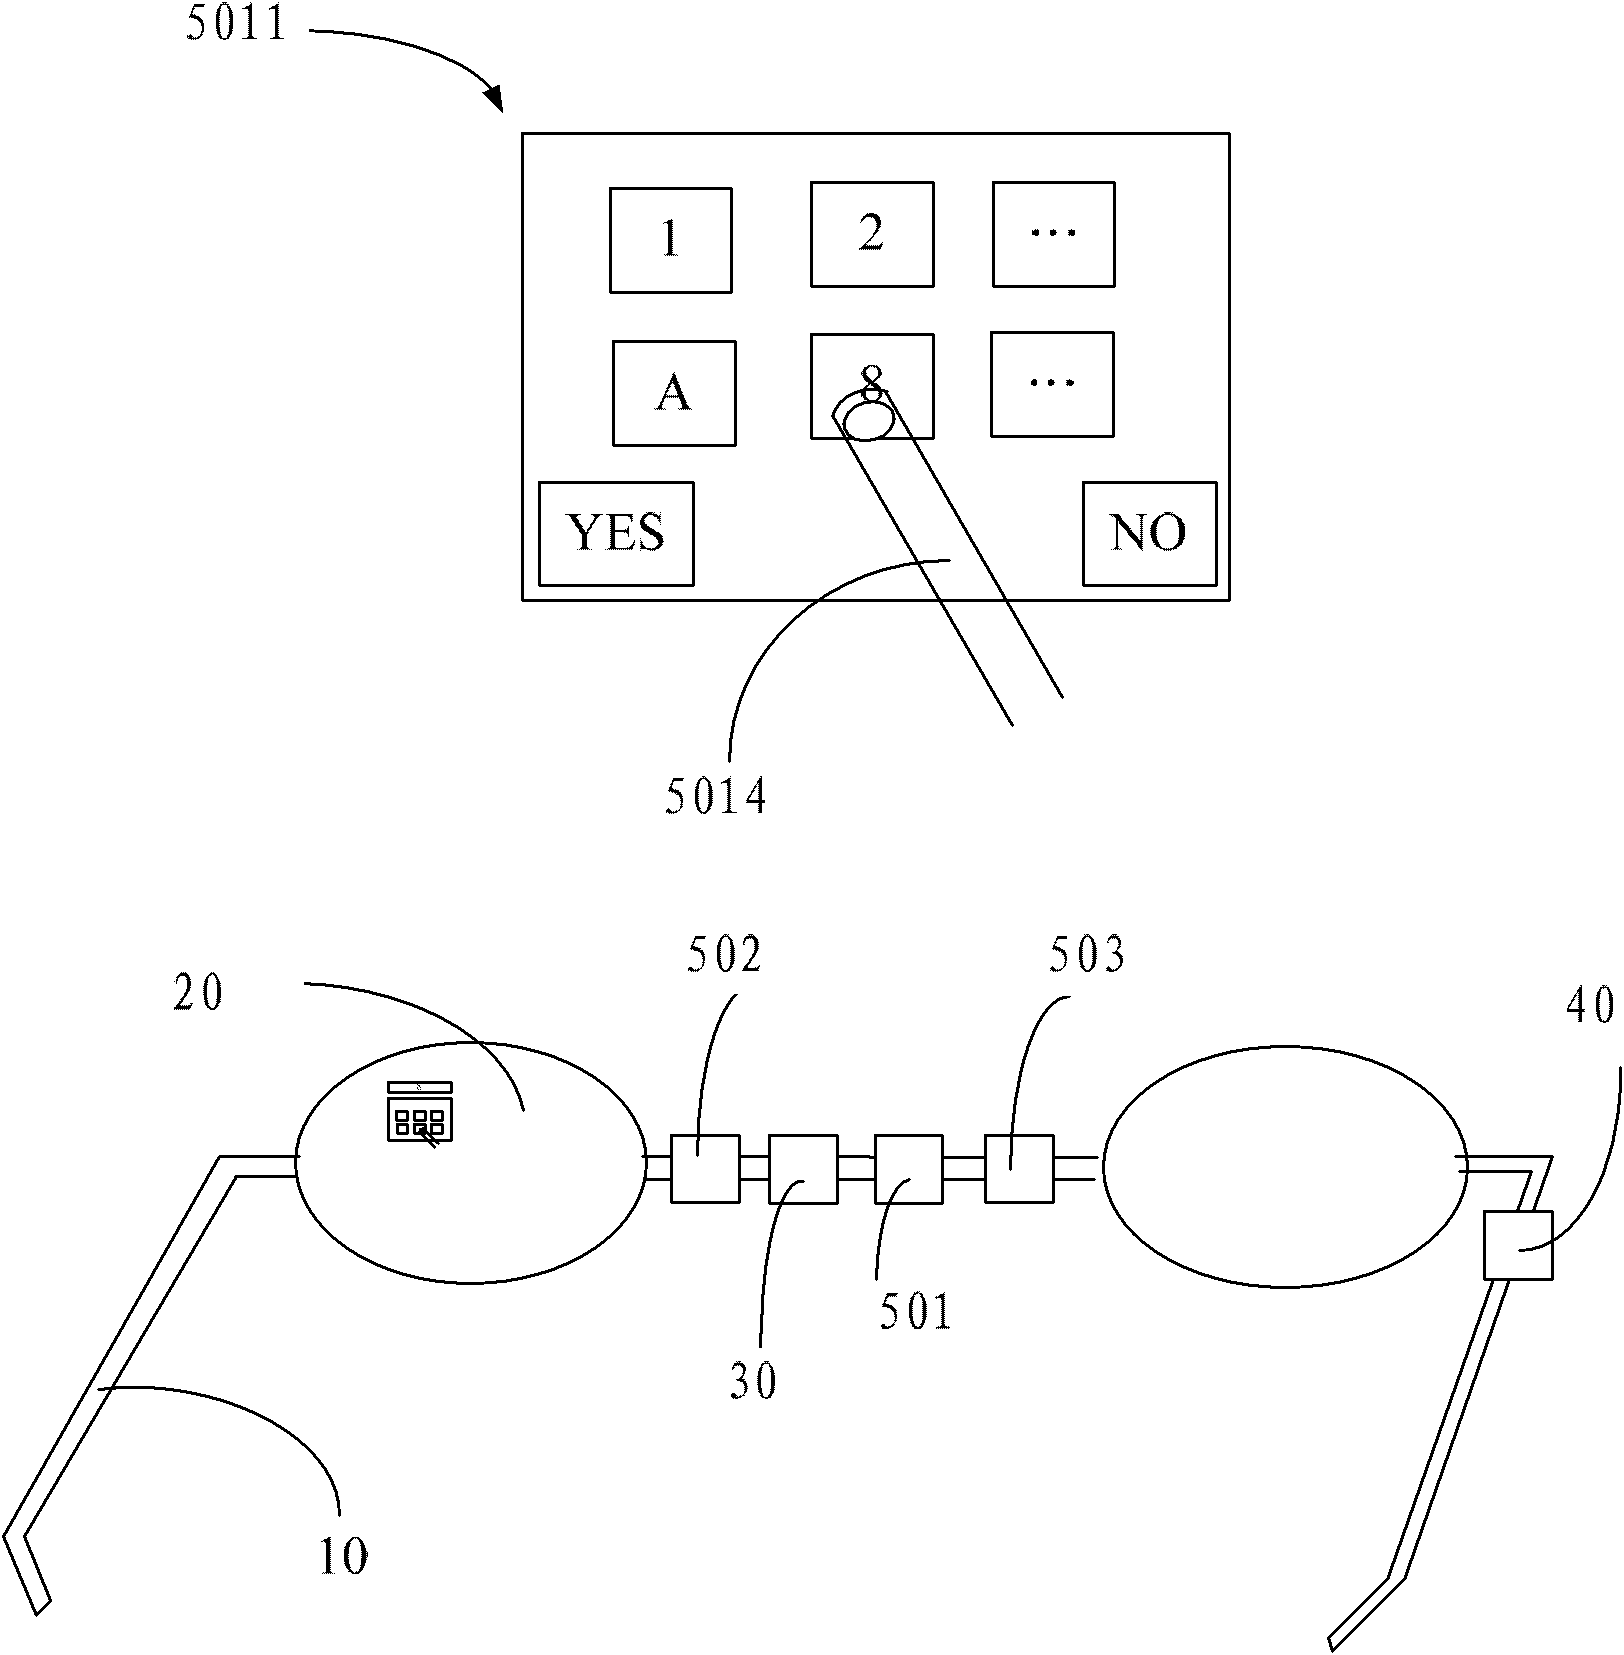 Spectacles-type display device with communication function